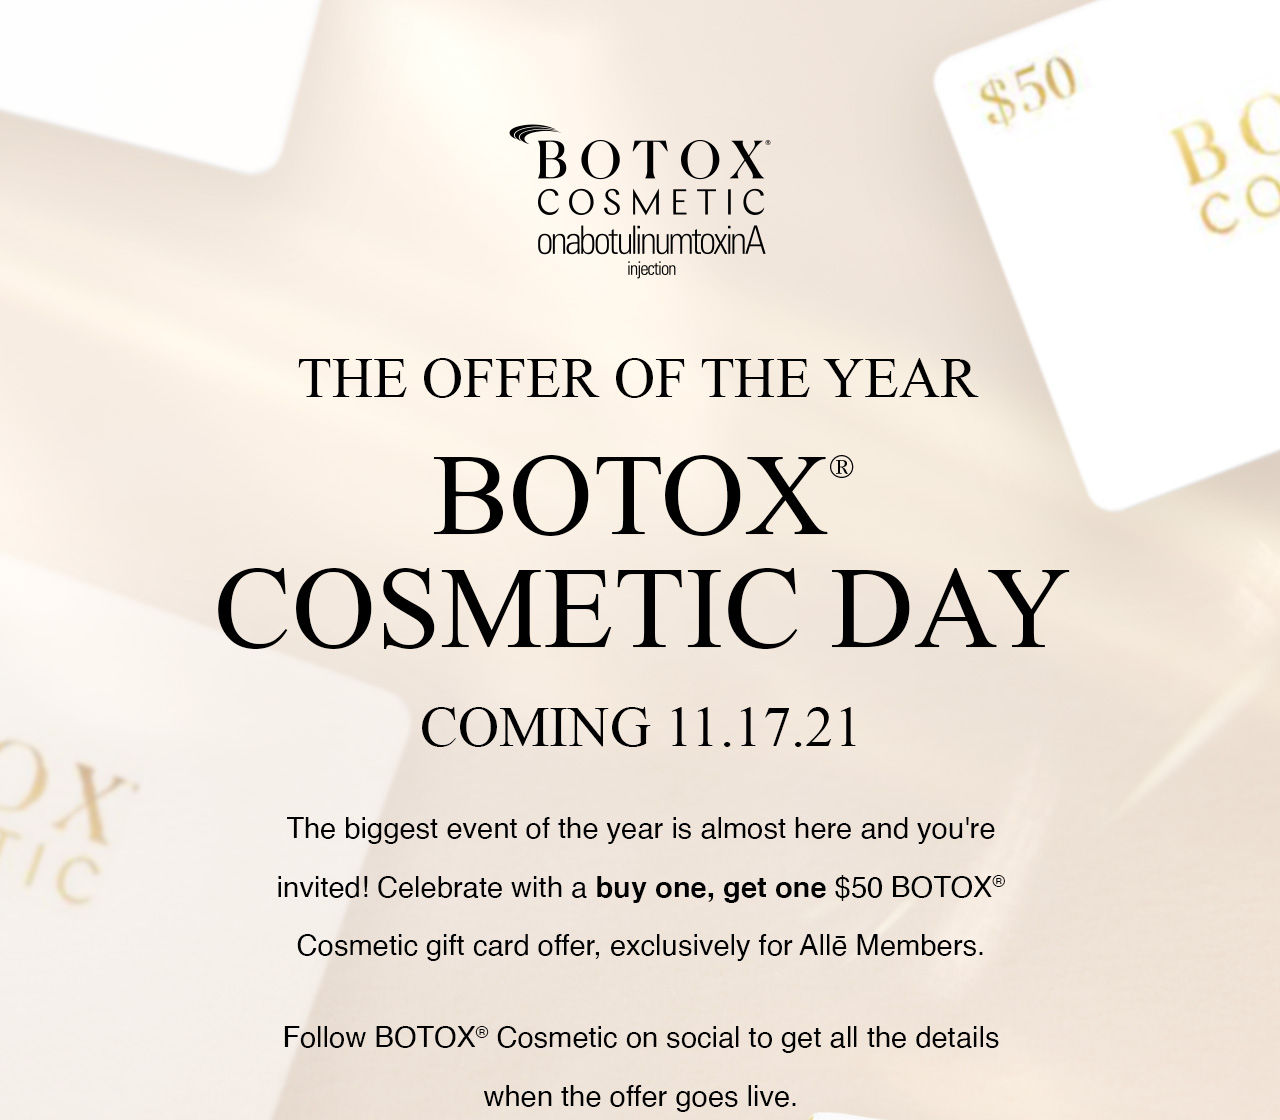 NATIONAL BOTOX DAY Everything to Know to Access BEST Savings!